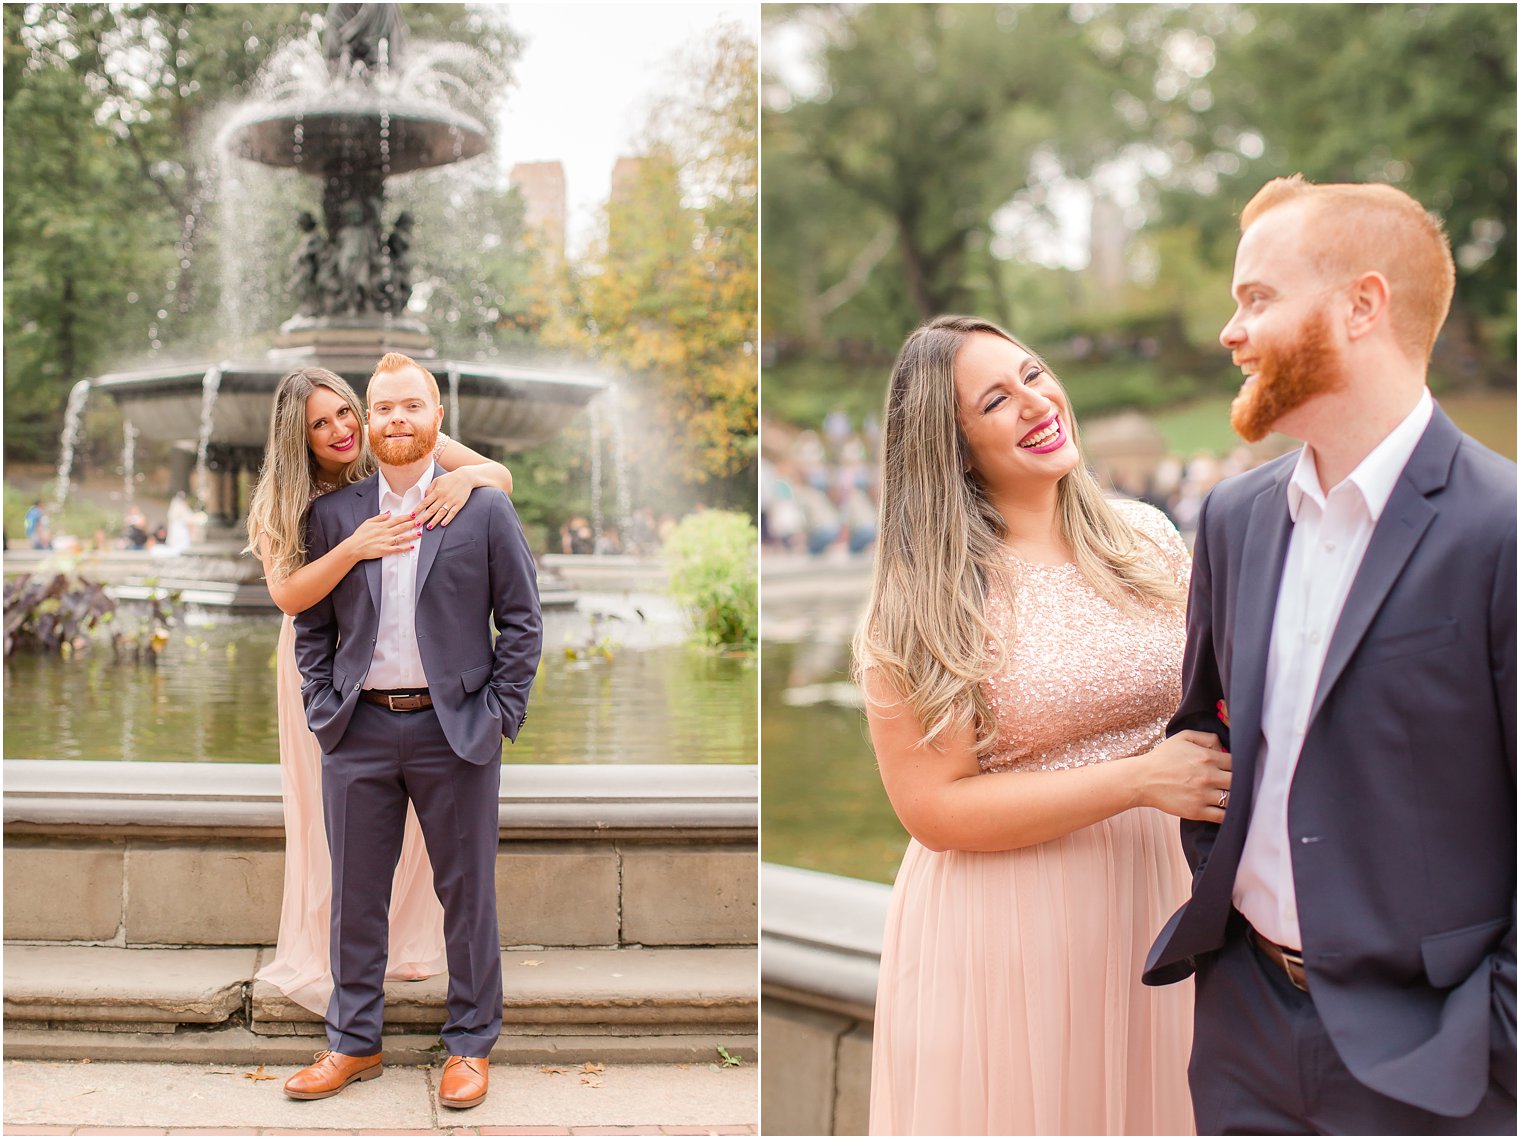 Couple posing for photos in front of Bethesda Fountain in Central Park